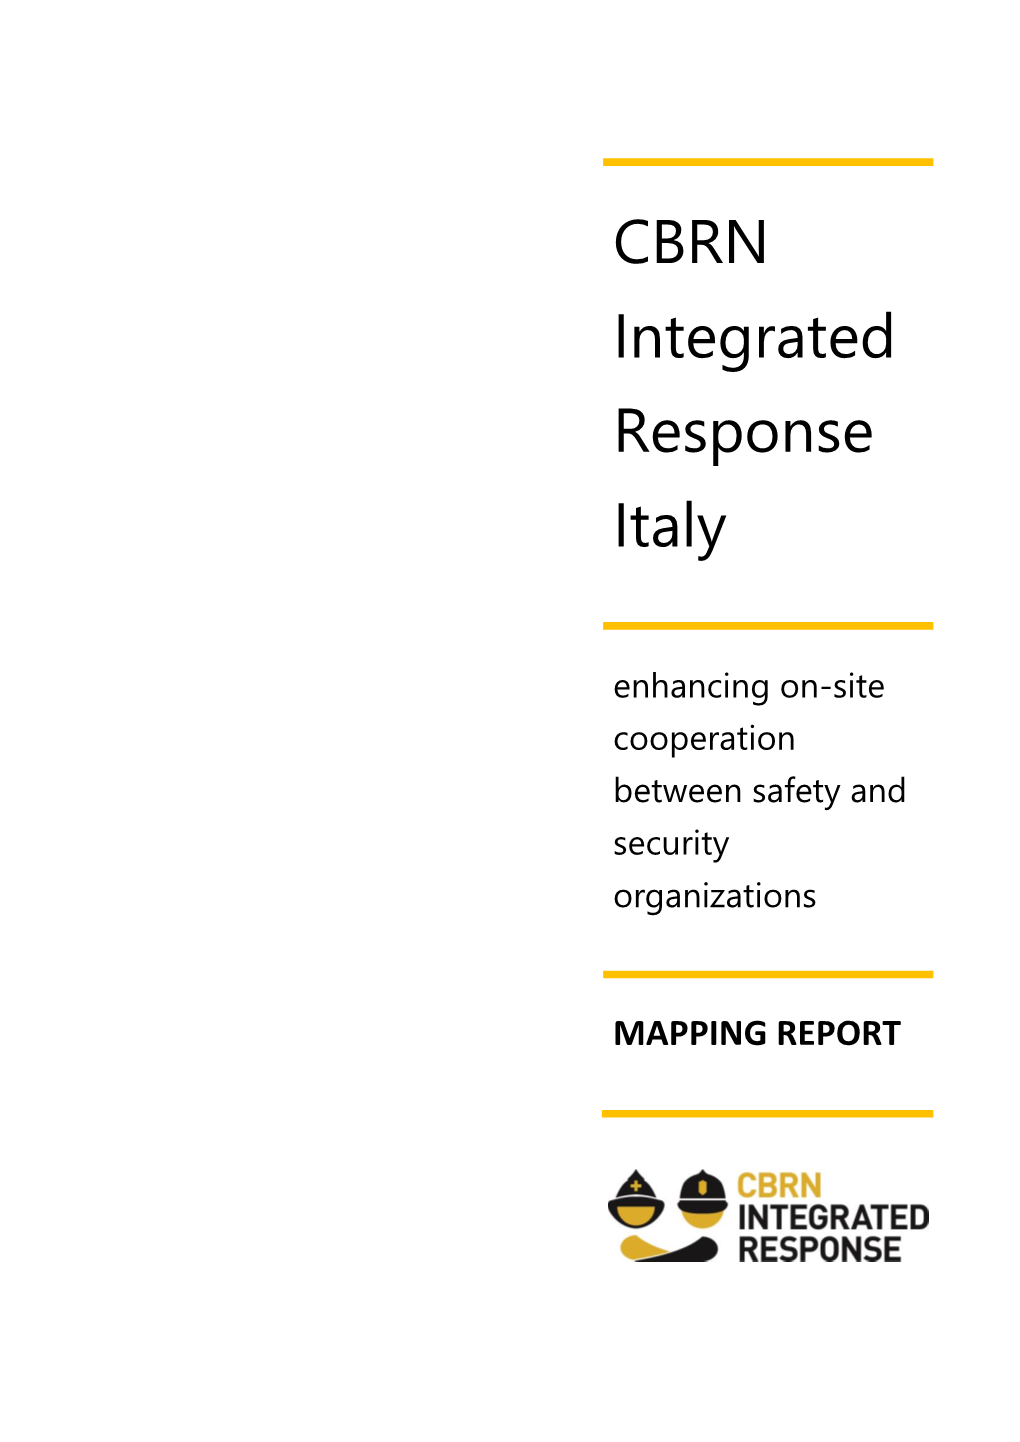 CBRN Integrated Response Italy Project